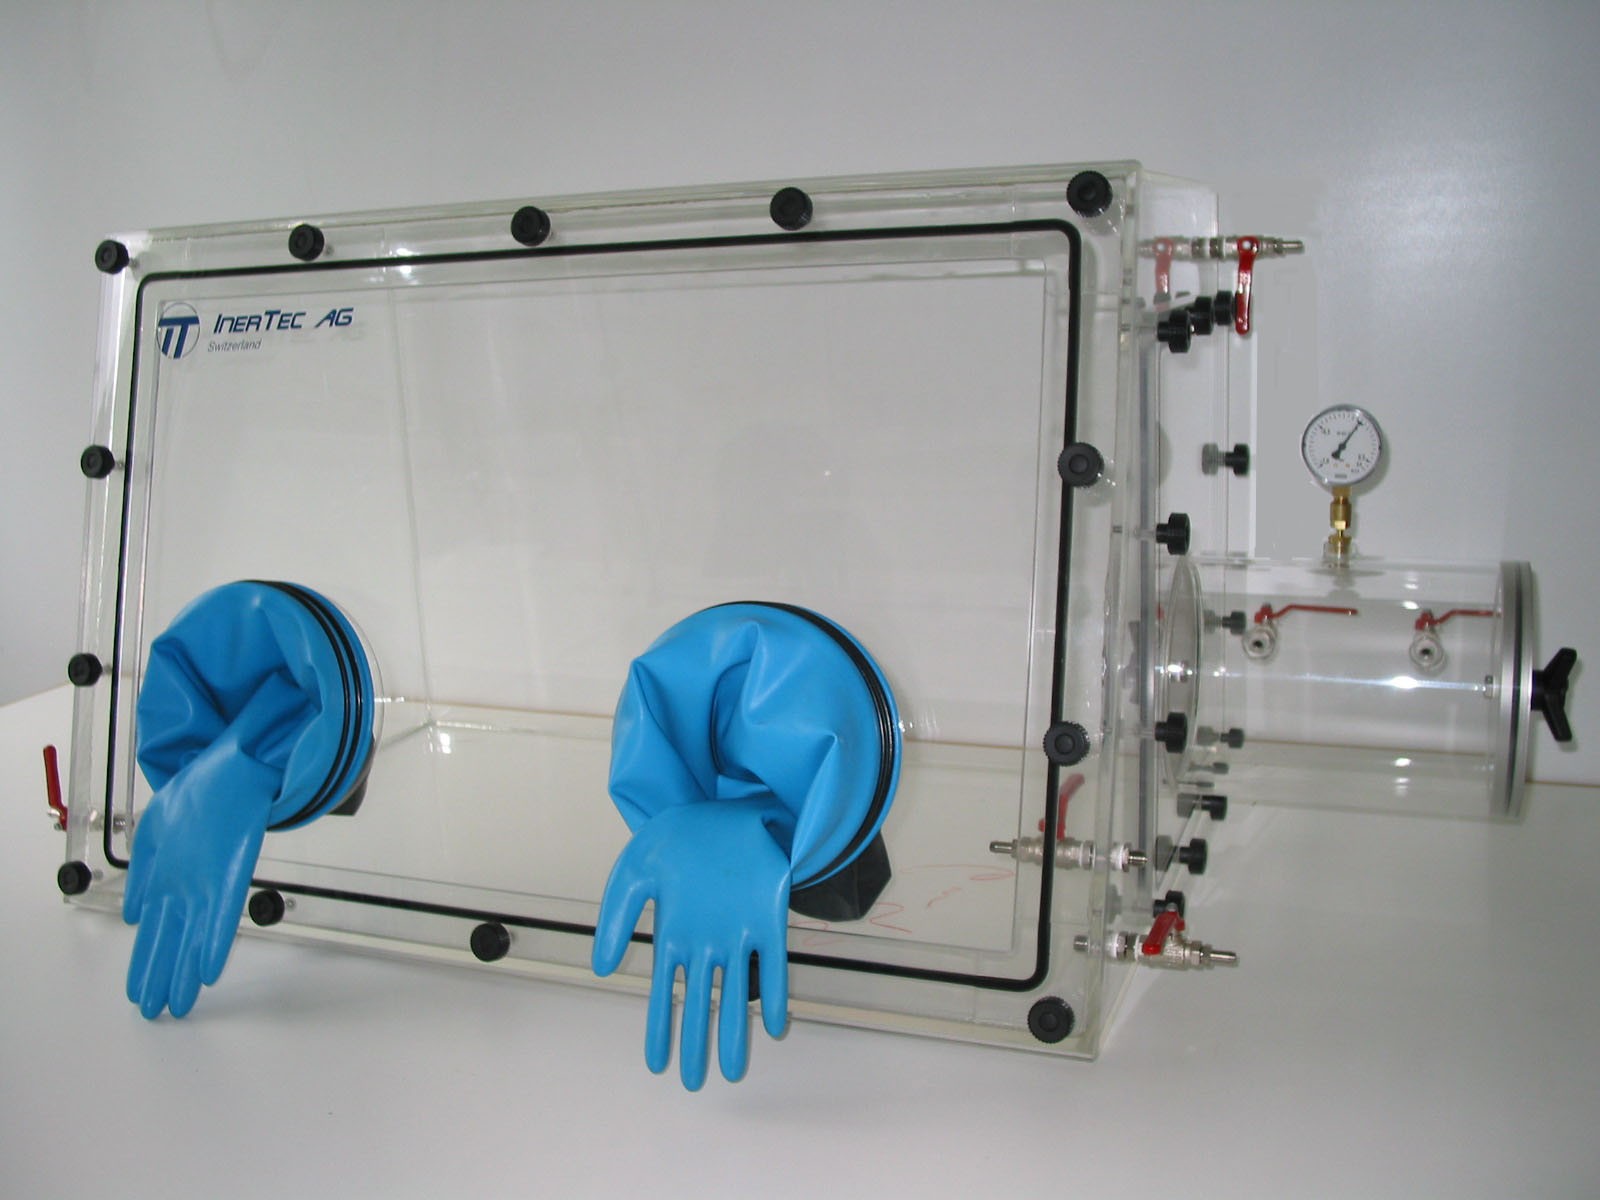 Glovebox made of acrylic&gt; Gas filling: automatic flushing with pressure control, front version: standard, side version: hinged doors Control: humidity regulator with oxygen display